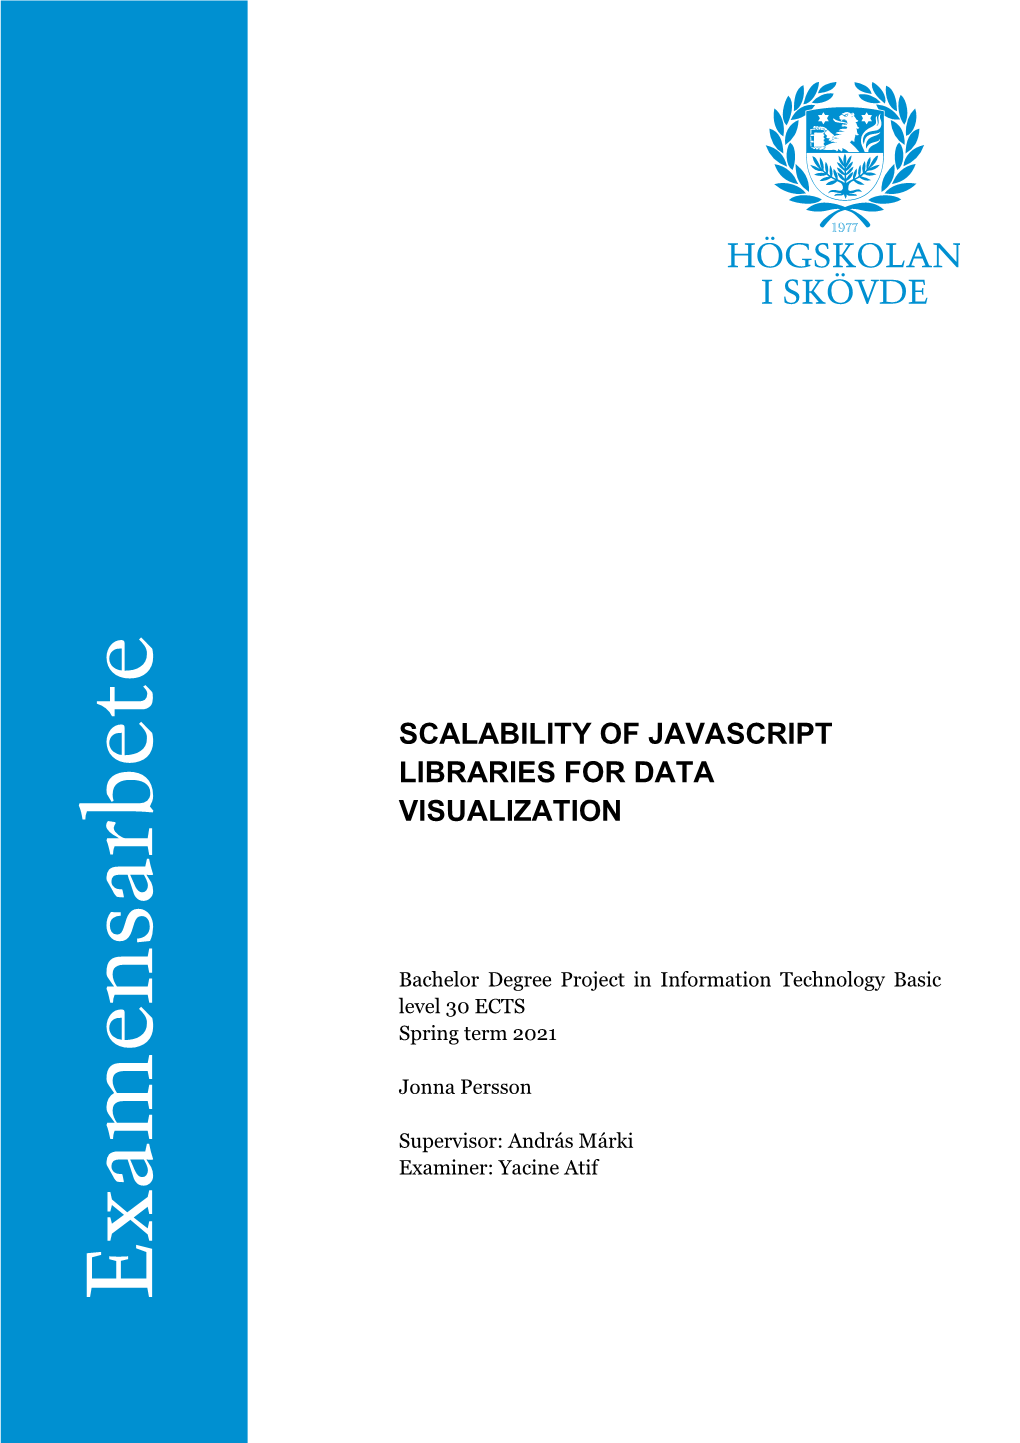 Scalability of Javascript Libraries for Data Visualization